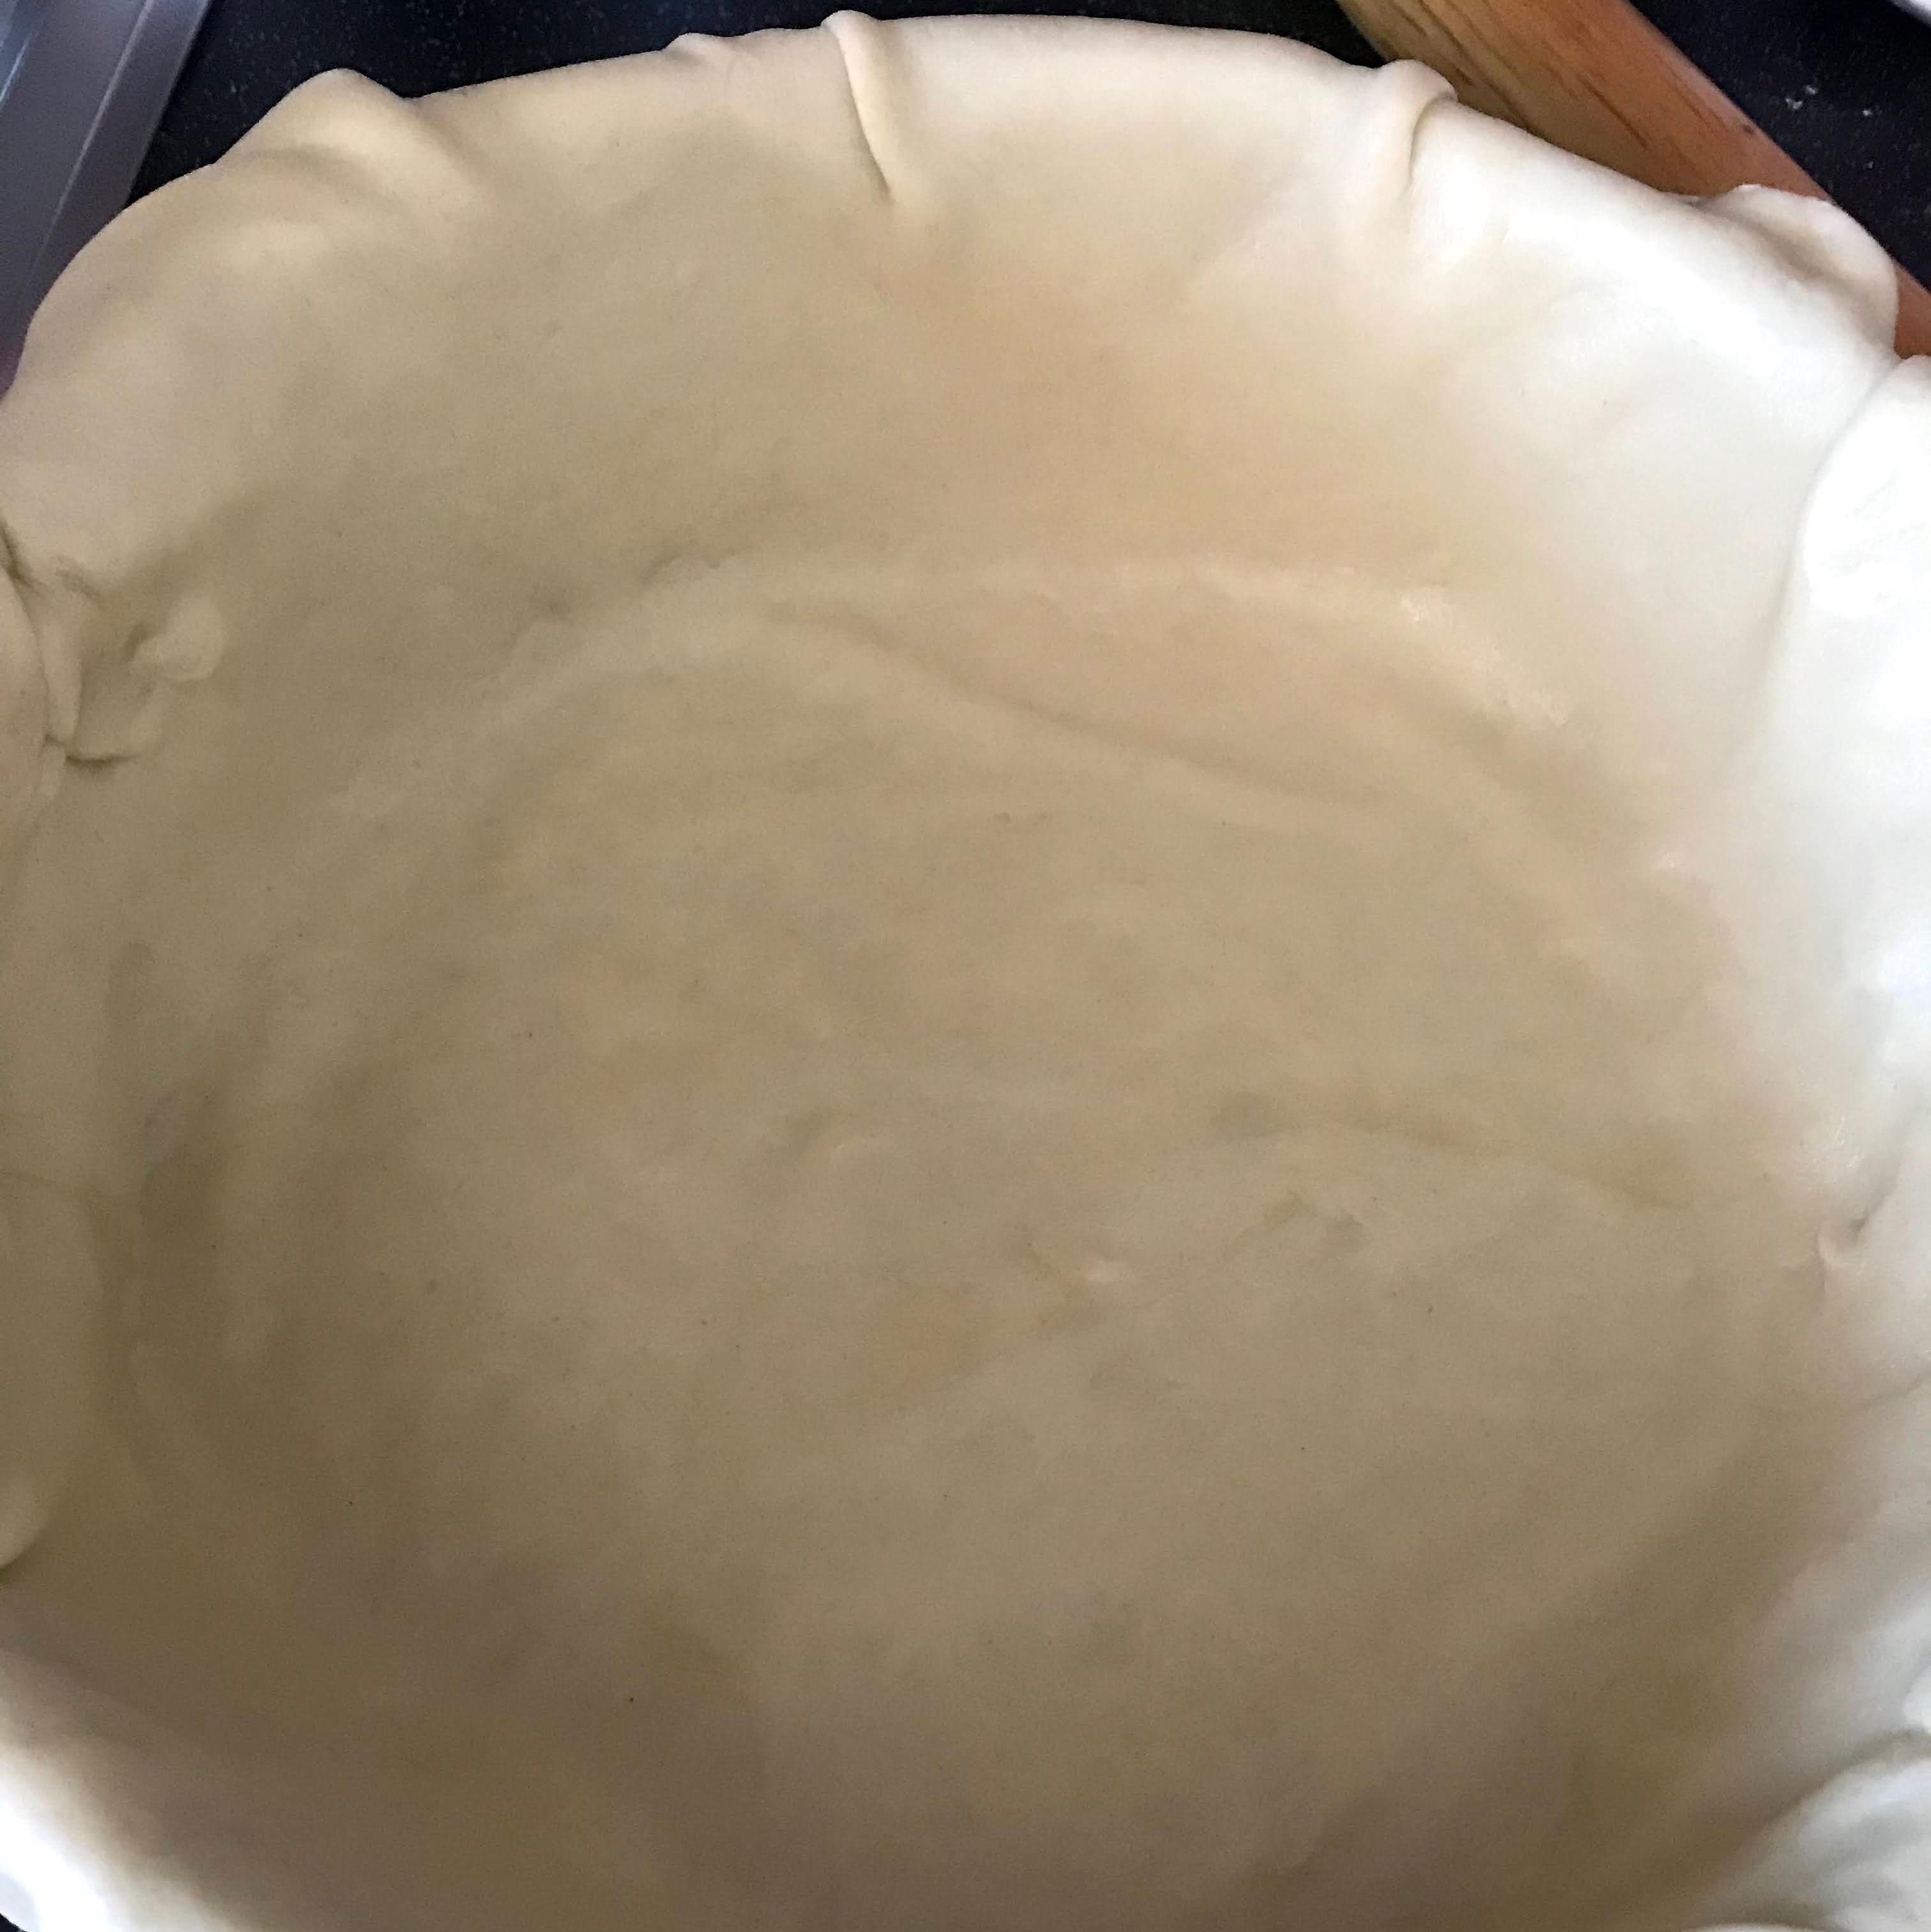 Sprinkle flour on the work surface and roll out the bottom pie crust into a circle. Wrap it around the rolling pin,then transfer it to the pie dish and add the apple mixture.